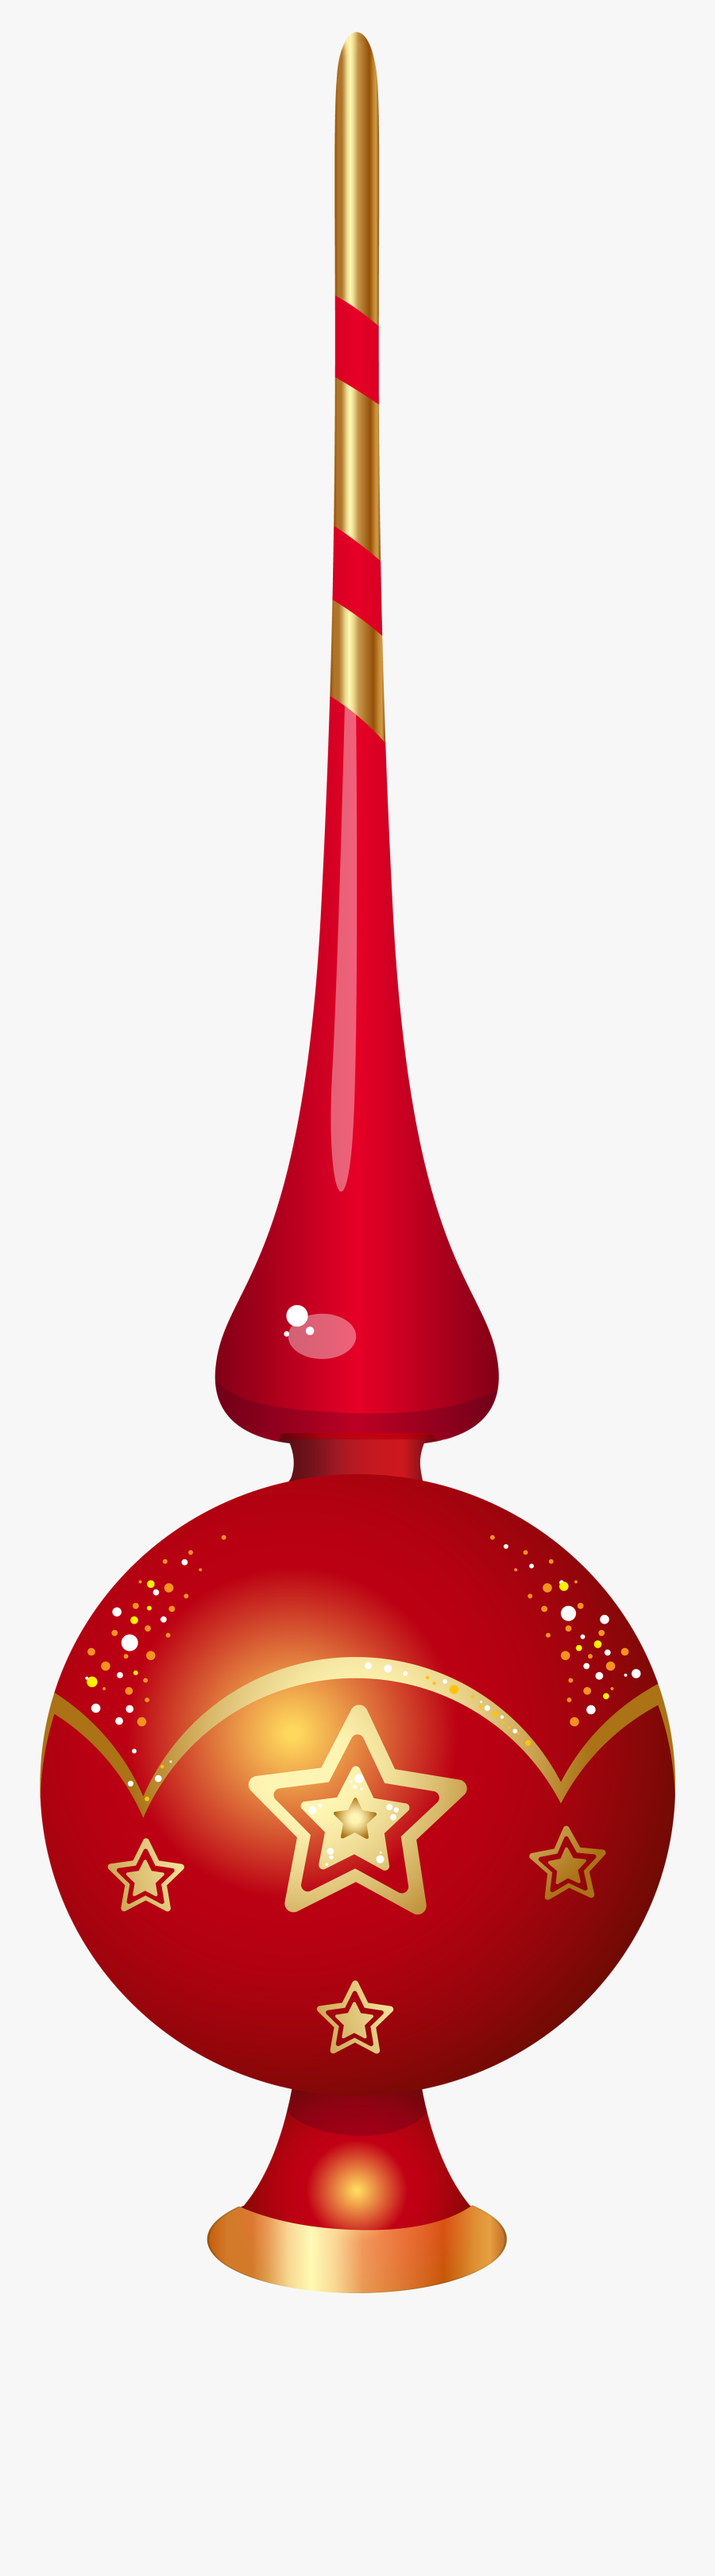 Red Christmas Tree Top Ornament Transparent Png Clip - Top Ornament For Christmas Tree, Transparent Clipart